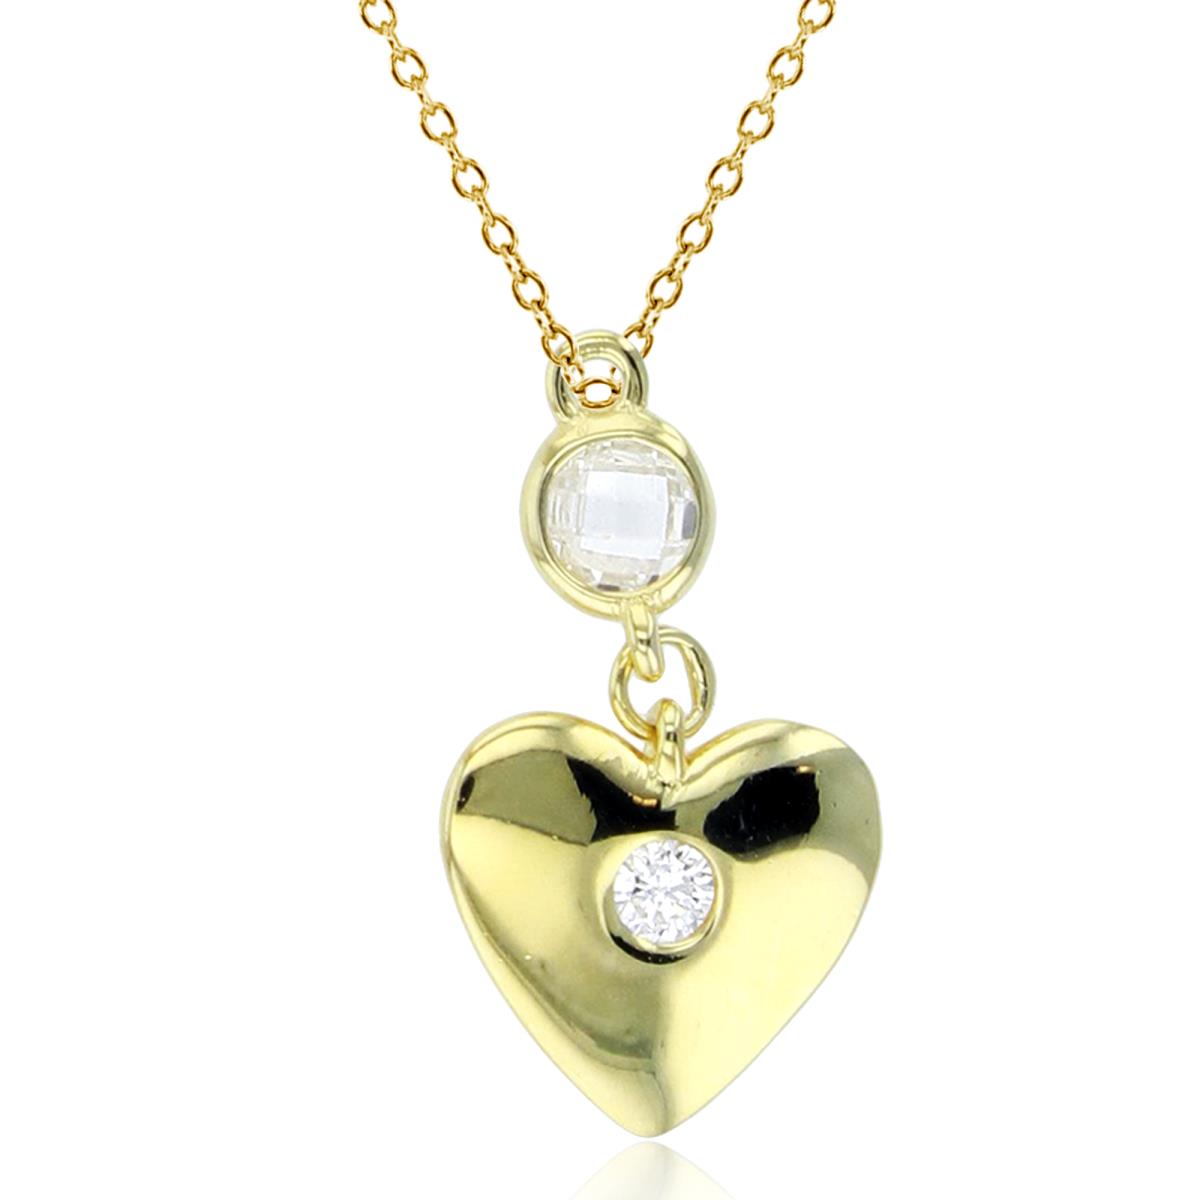 Sterling Silver+1Micron Yellow Gold Rnd CZ Bezel Dangling Heart 18"Necklace